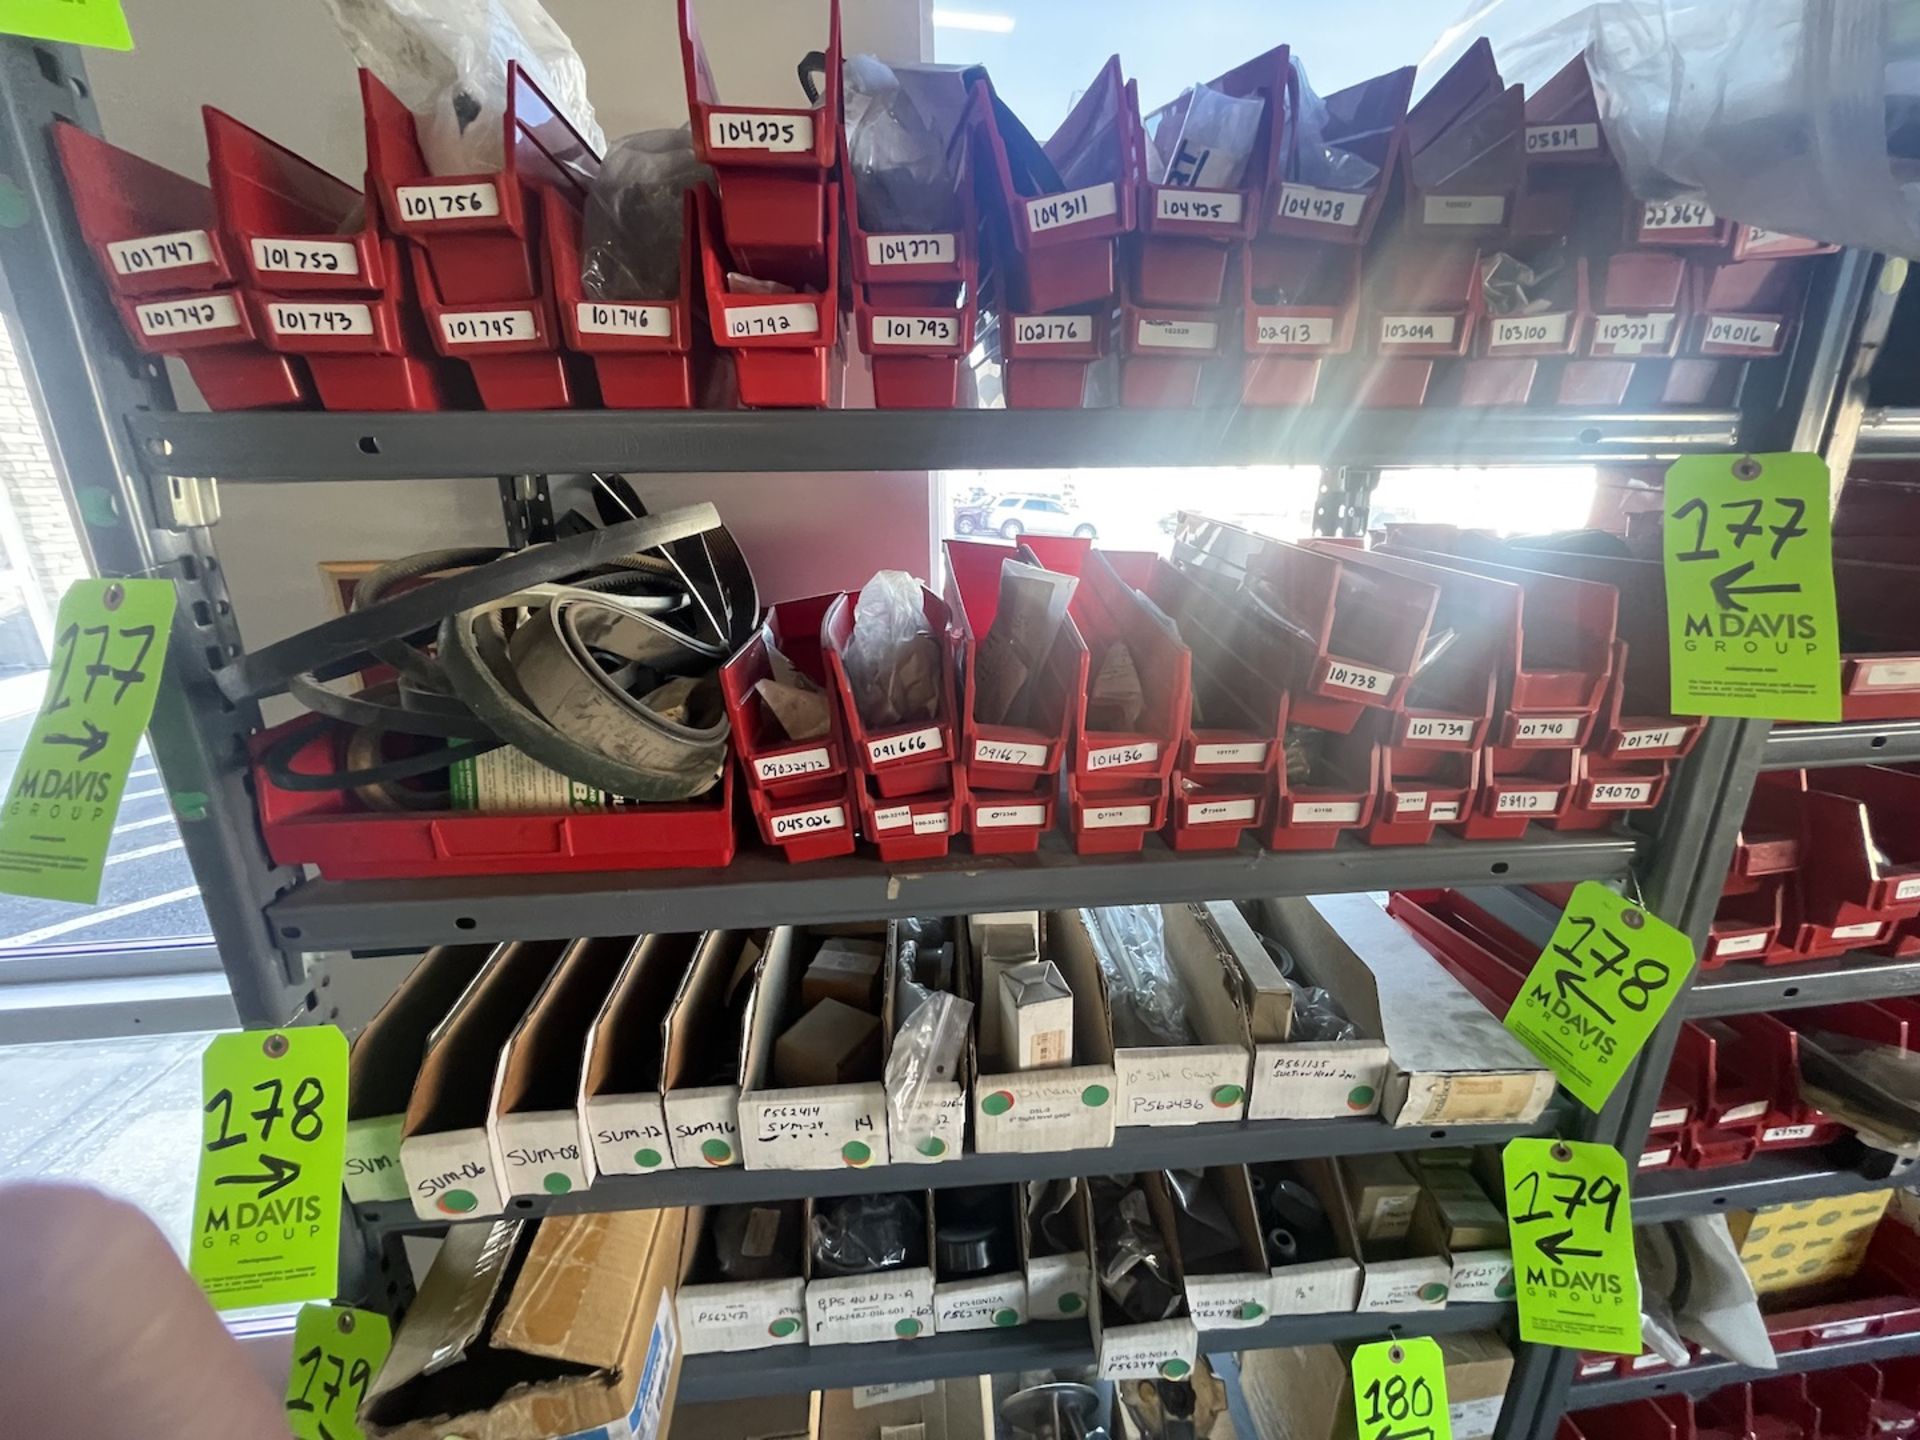 ASSORTED PARTS INCLUDING MITSUBISHI V-BELTS, GEHL, MUSTANG, XPRT PARTS AND MORE (ALL PURCHASES